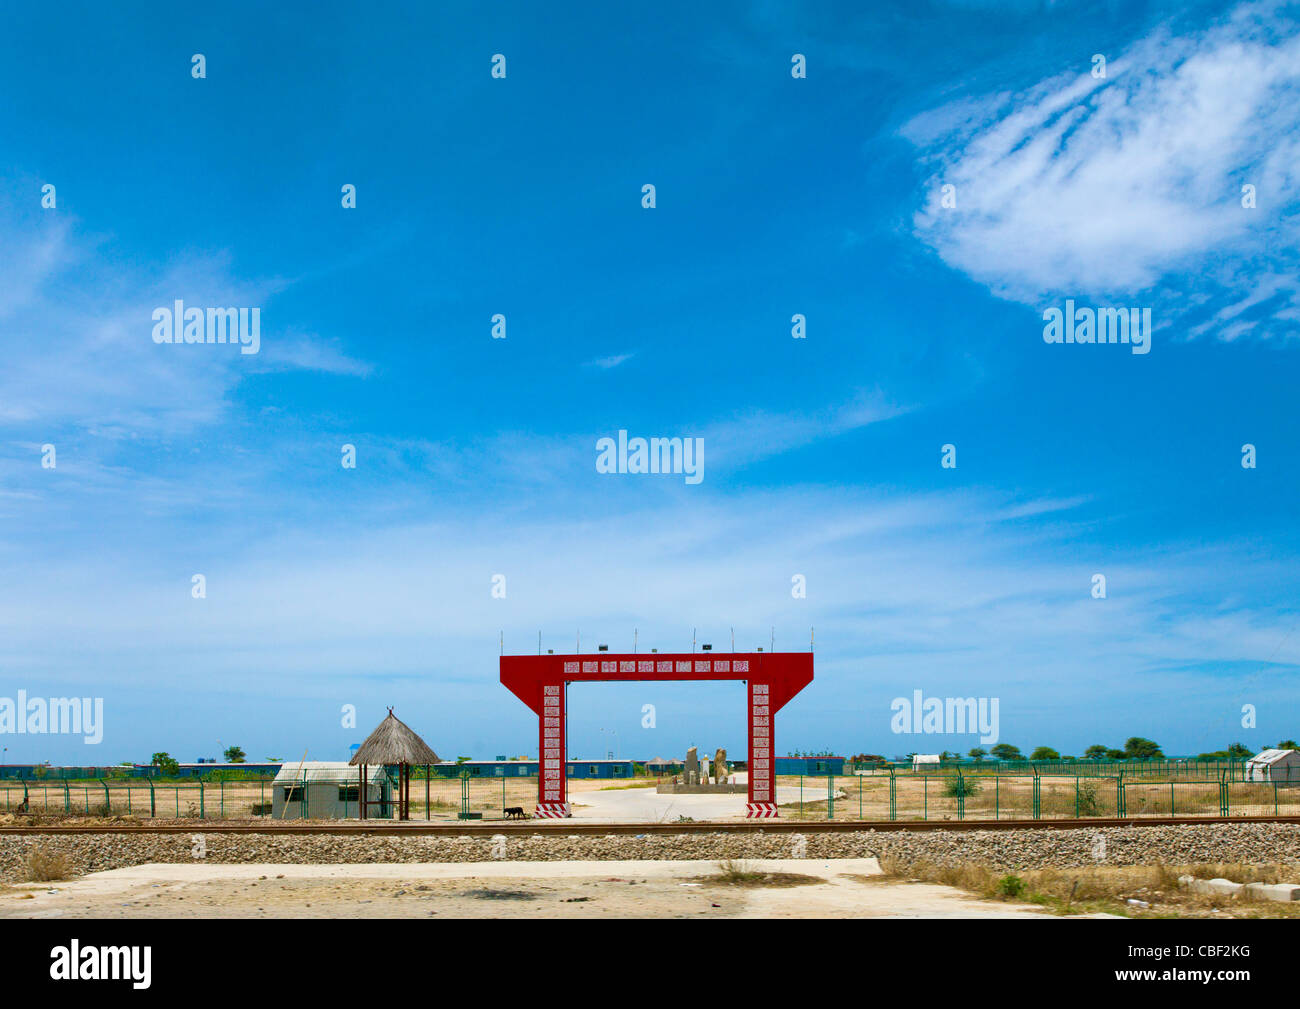 Chinese Arch In Lobito, Angola Stock Photo